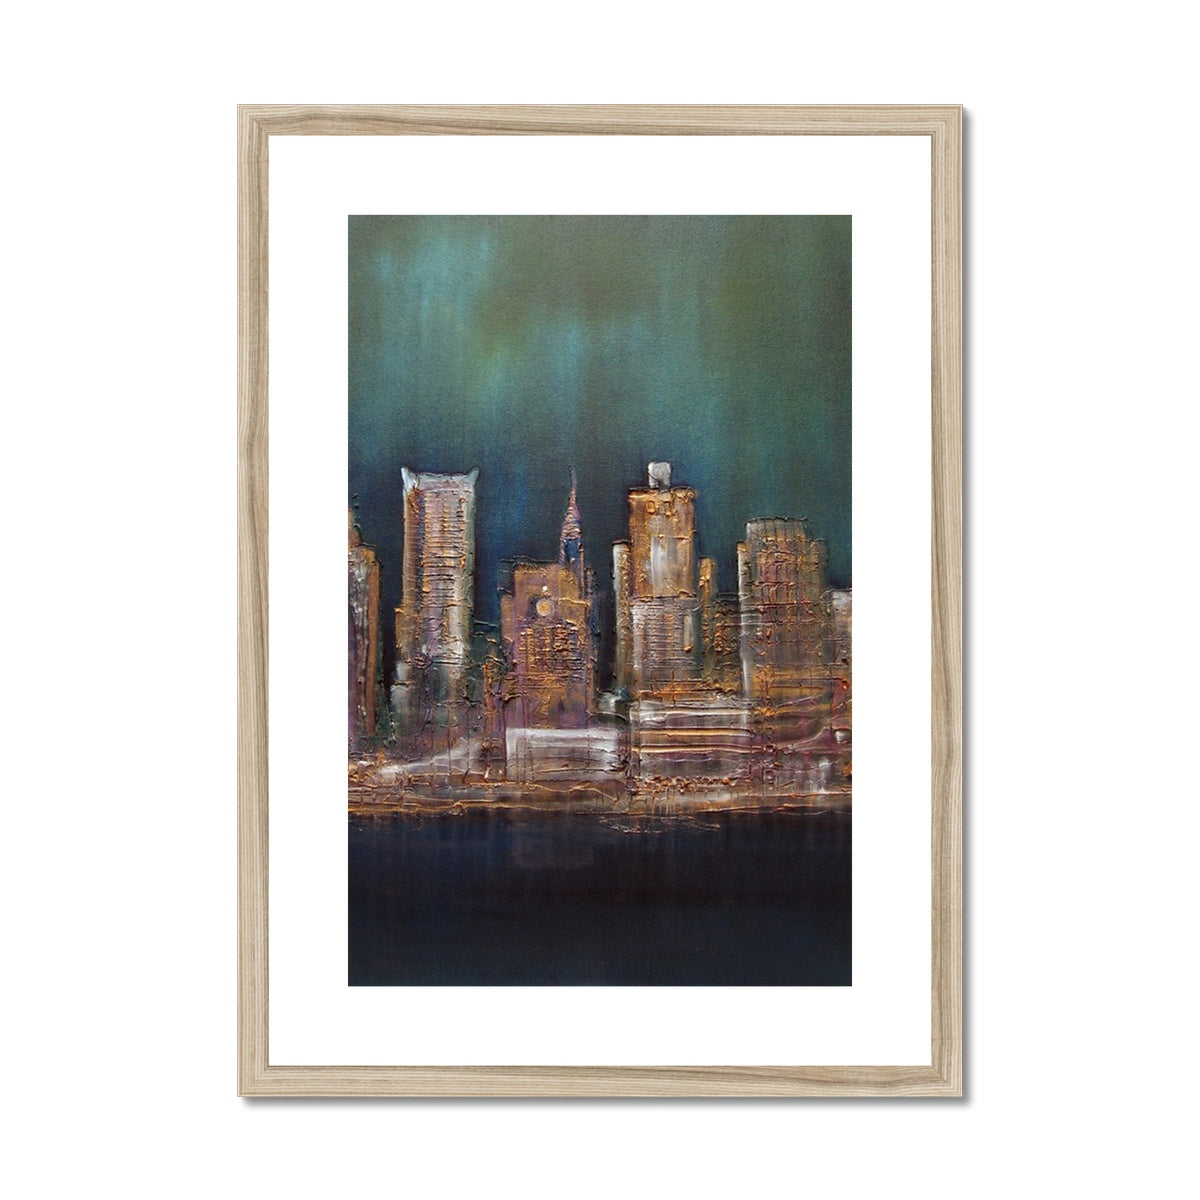 New York West Side Painting | Framed & Mounted Prints From Scotland-Framed & Mounted Prints-World Art Gallery-A2 Portrait-Natural Frame-Paintings, Prints, Homeware, Art Gifts From Scotland By Scottish Artist Kevin Hunter